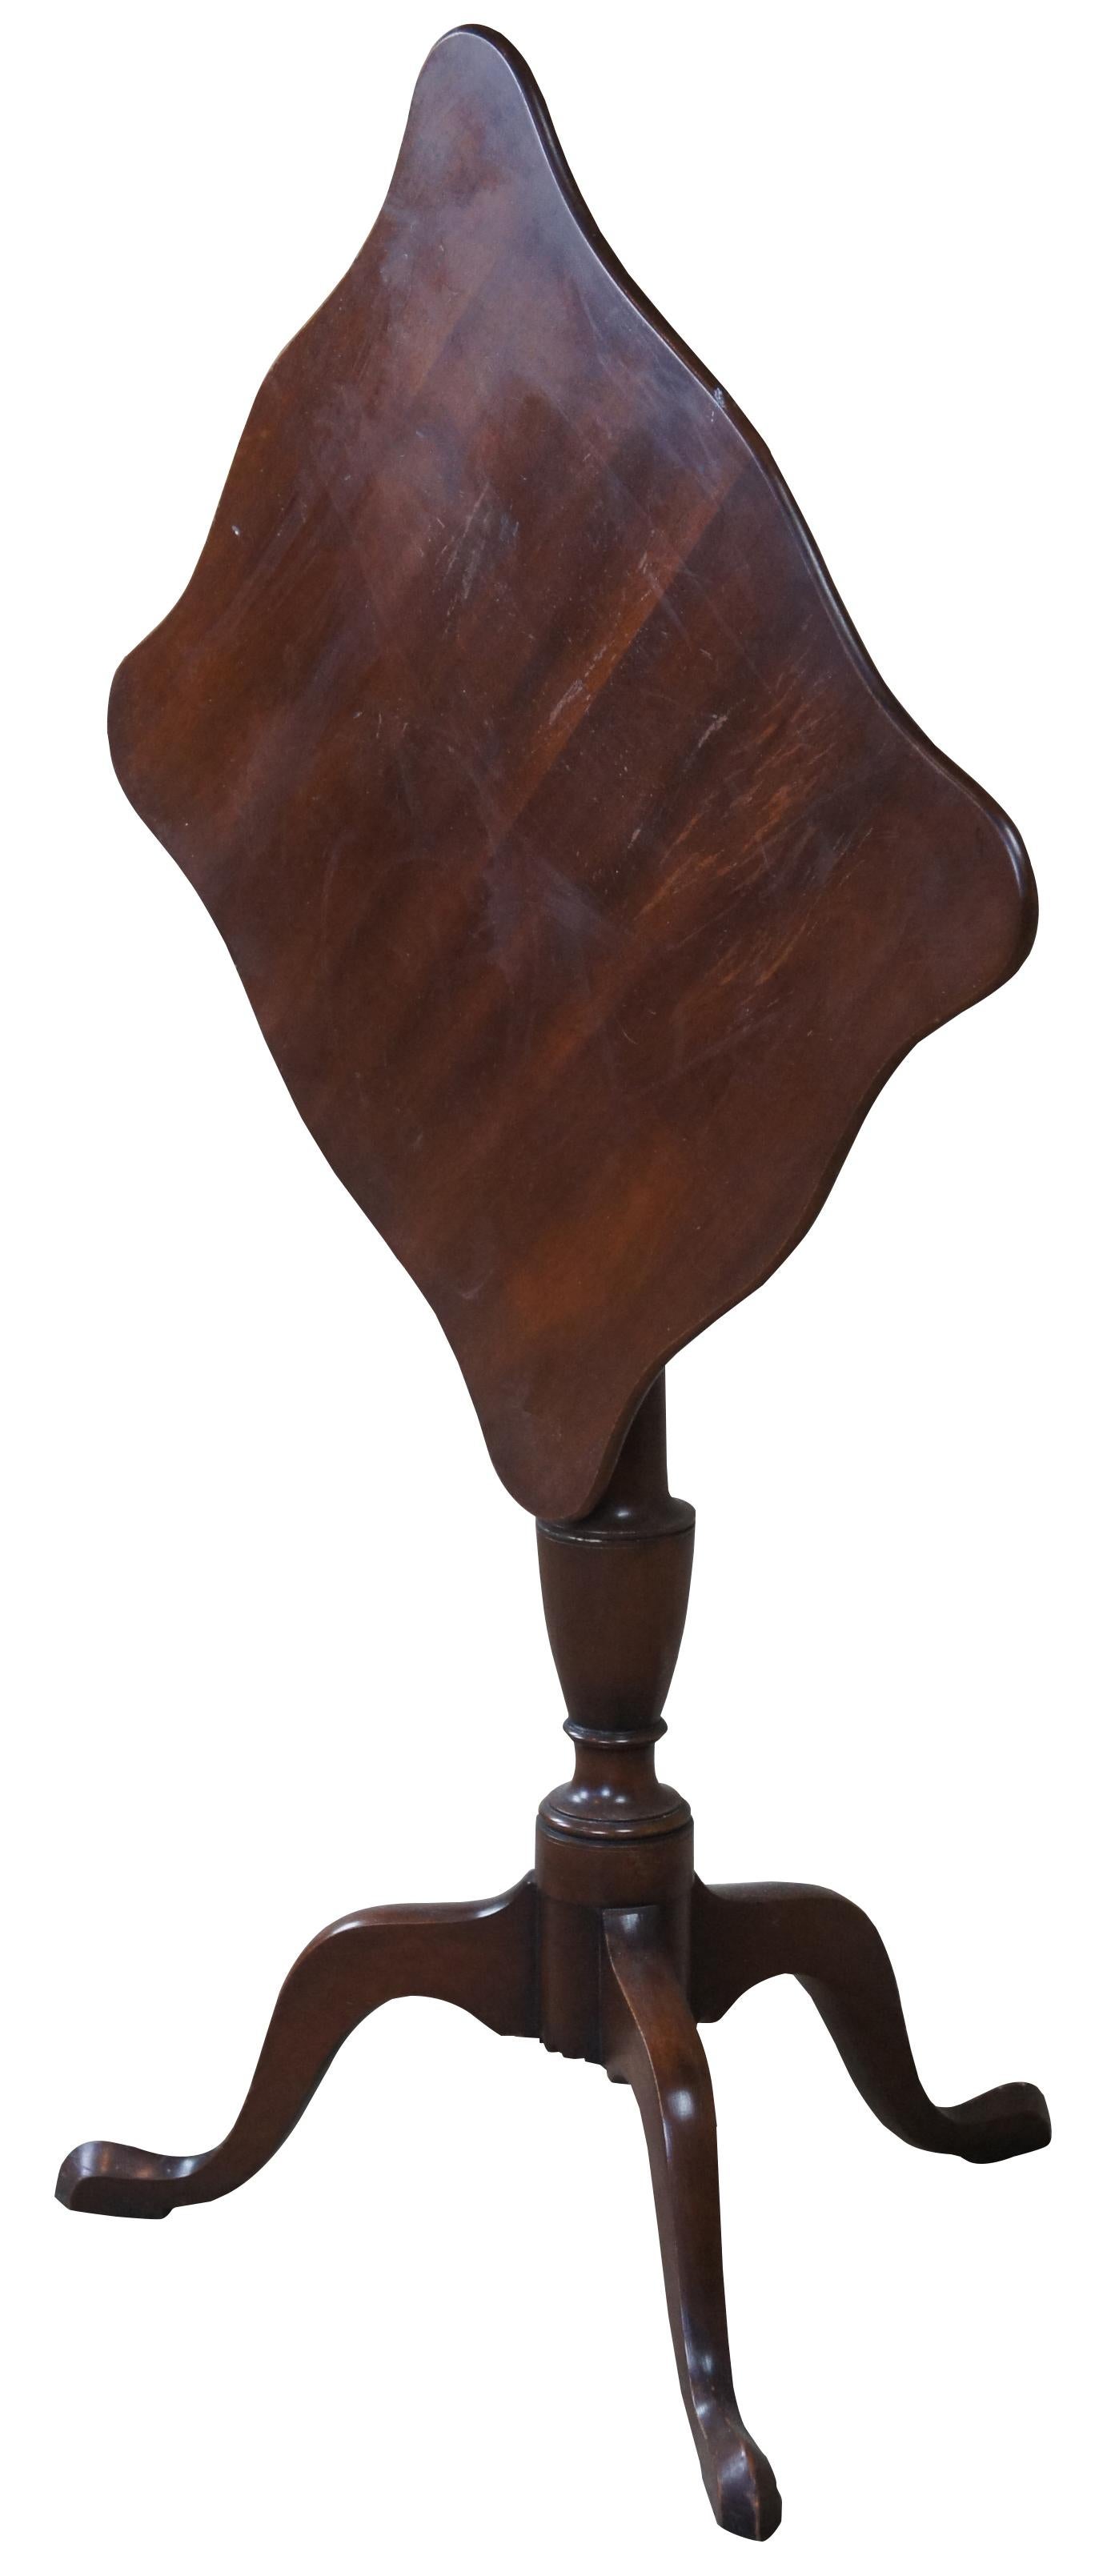 A Federal style mahogany candle stand by Kittinger, circa 1970s. Williamburg Restoration line. Features a rectangular top with serpentine edge over a baluster turned base with cabriole legs leading to pad feet.

Provenance: Estate of Carol Levitan